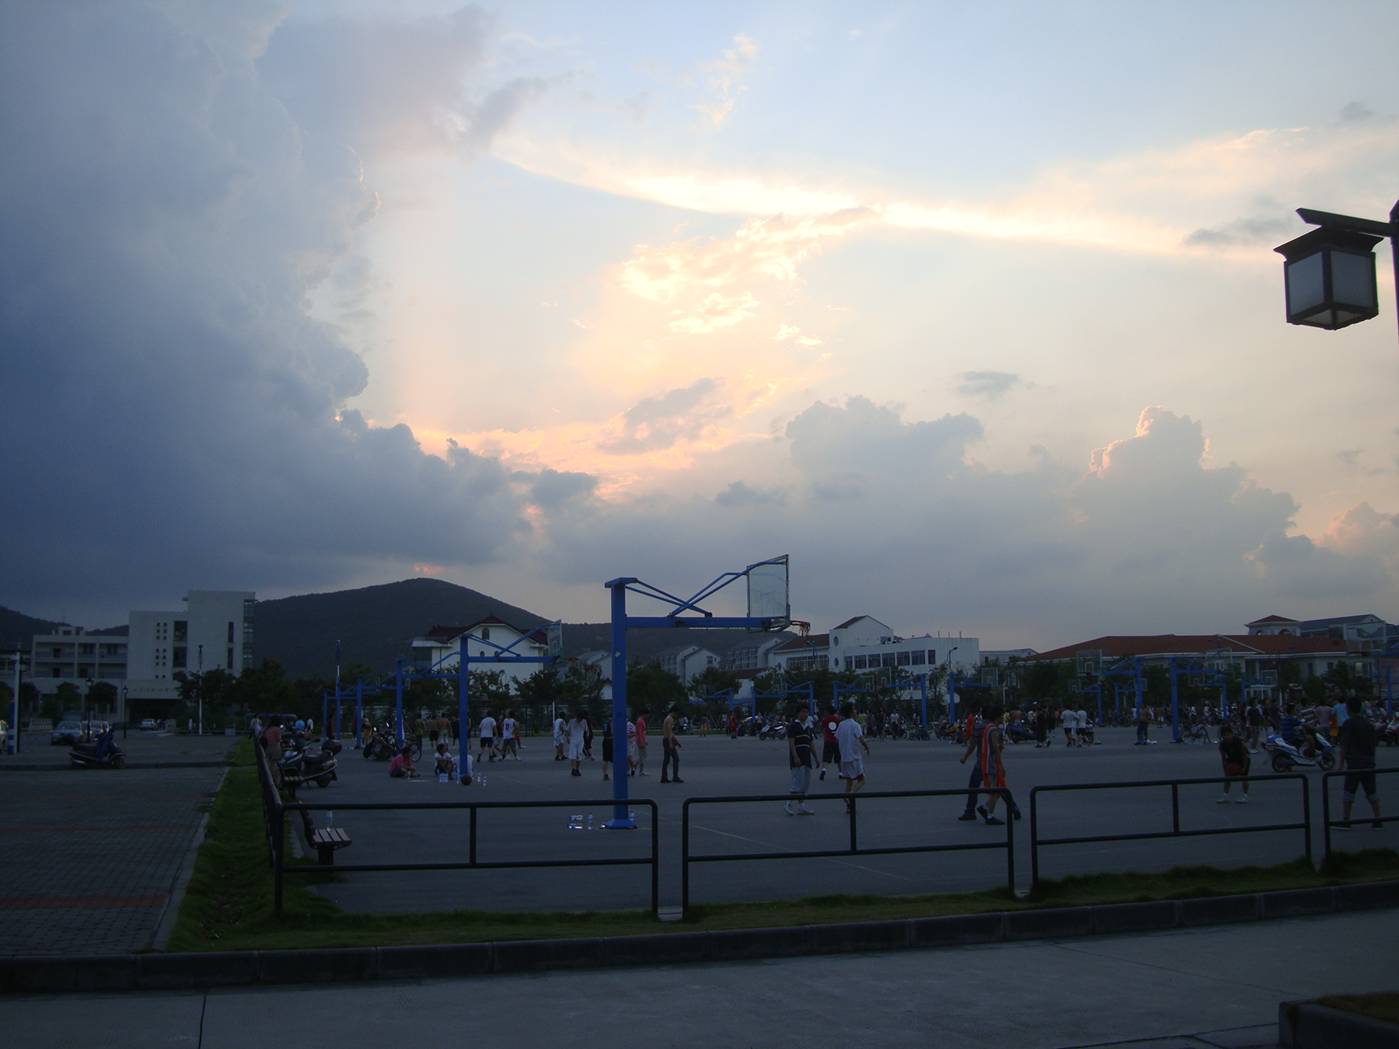 picture:  Thunder clouds over the basketball court and a dramatic sky.  Jiangnan University, Wuxi, China